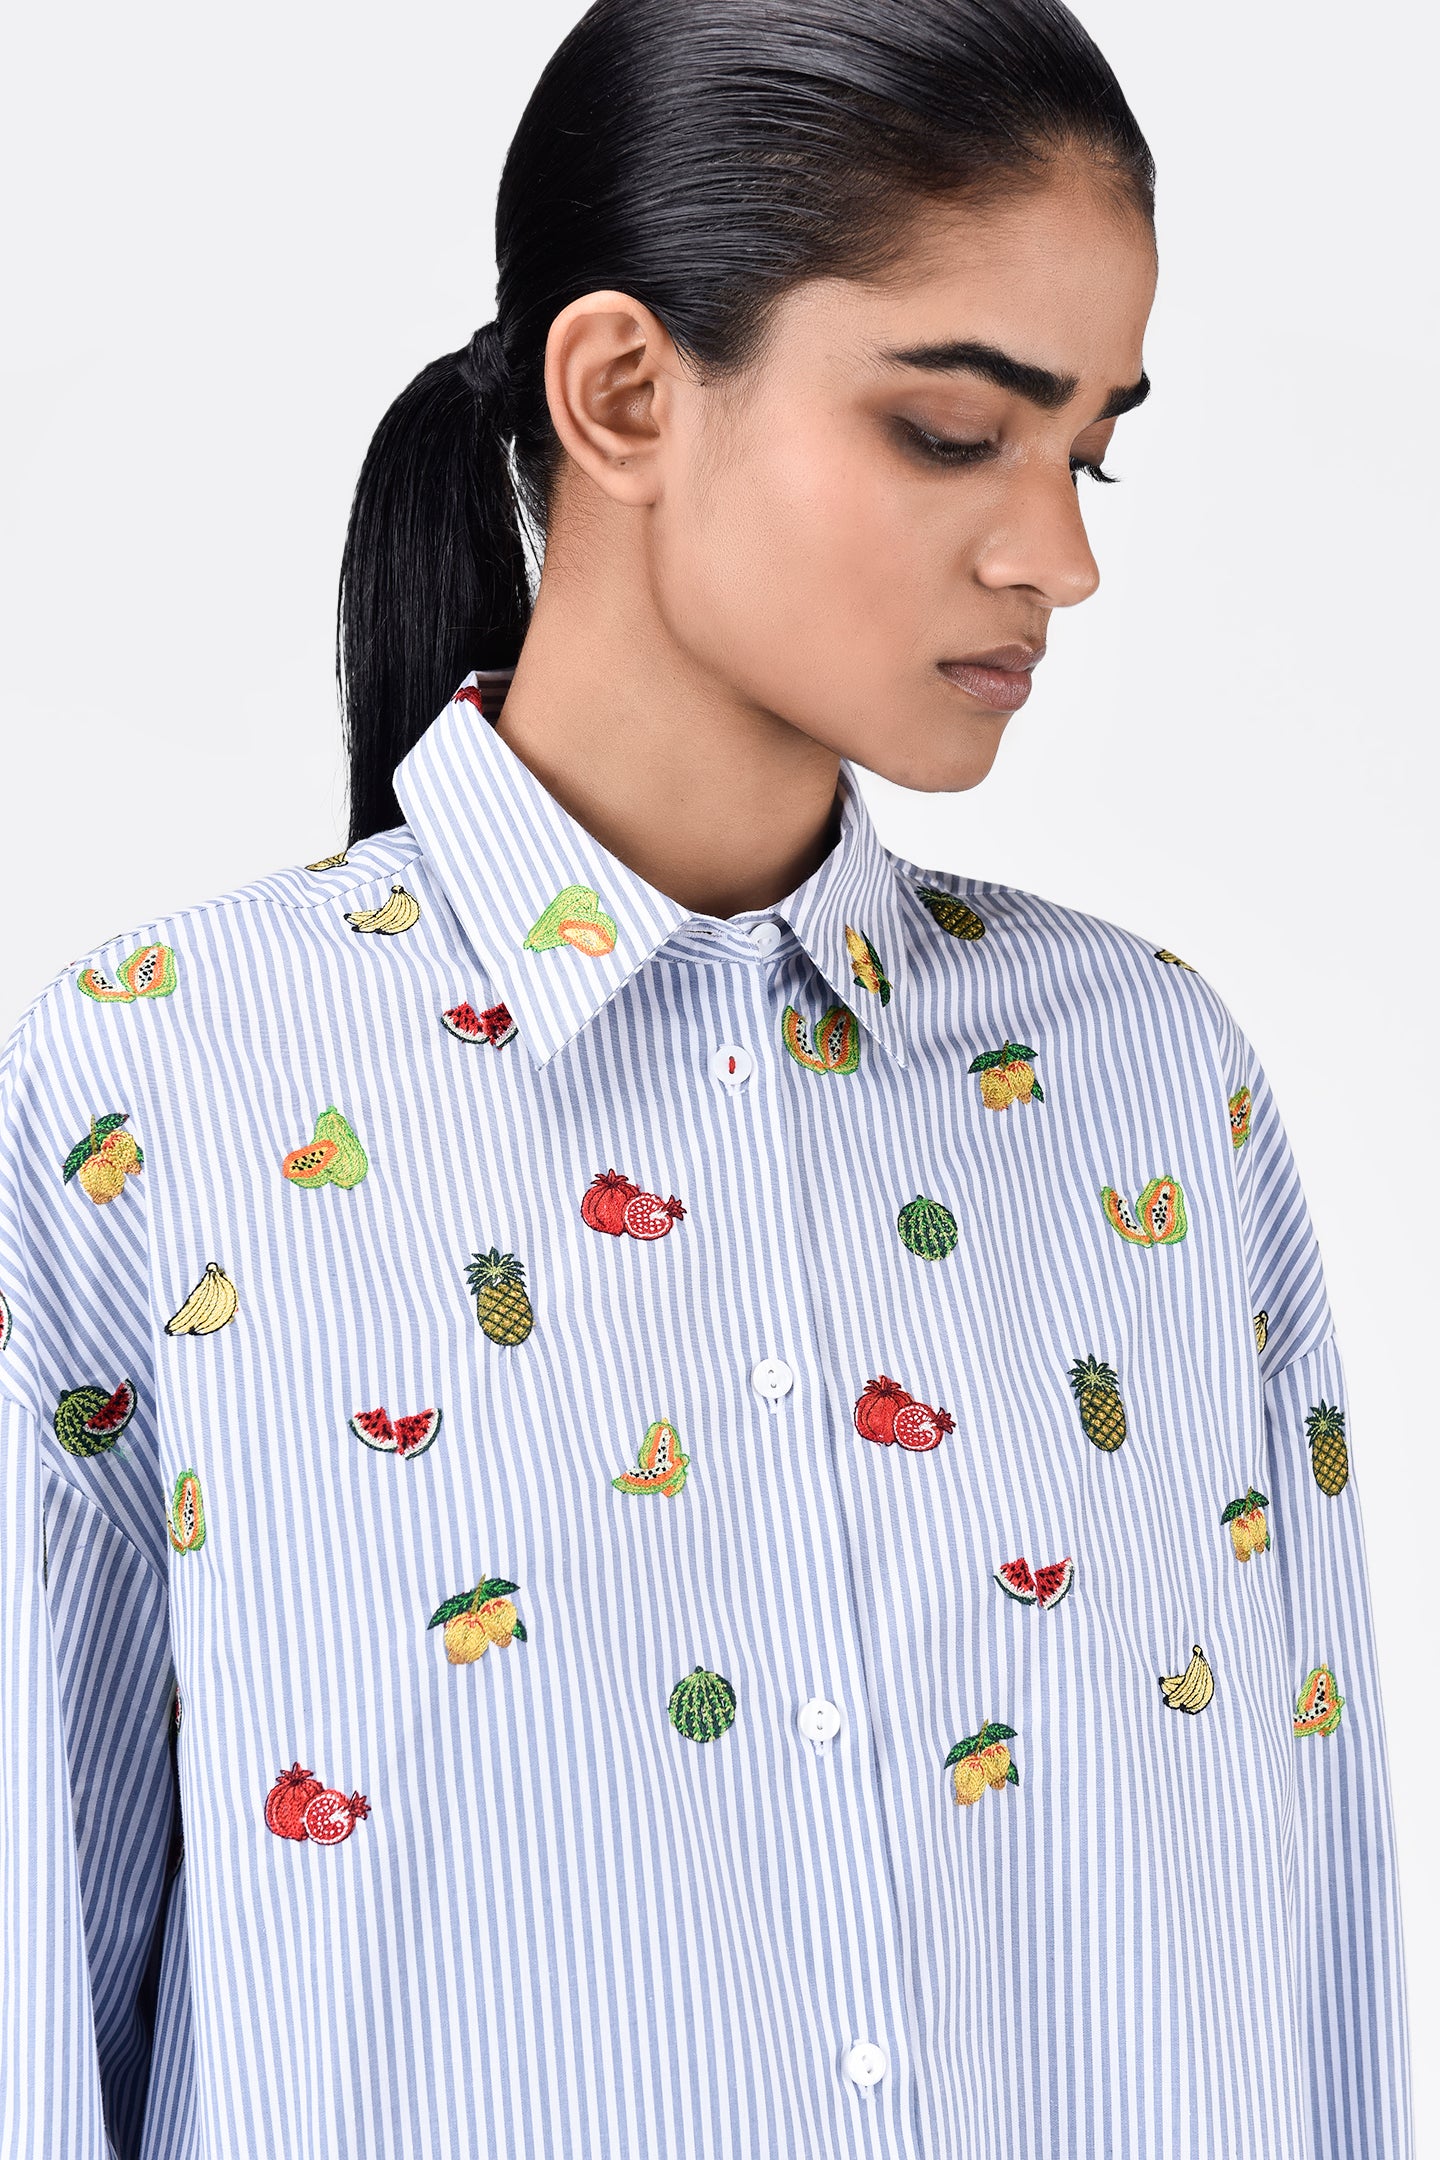 Easy-Fit Striped Button-Down Shirt with Mixed Fruit Embroidery